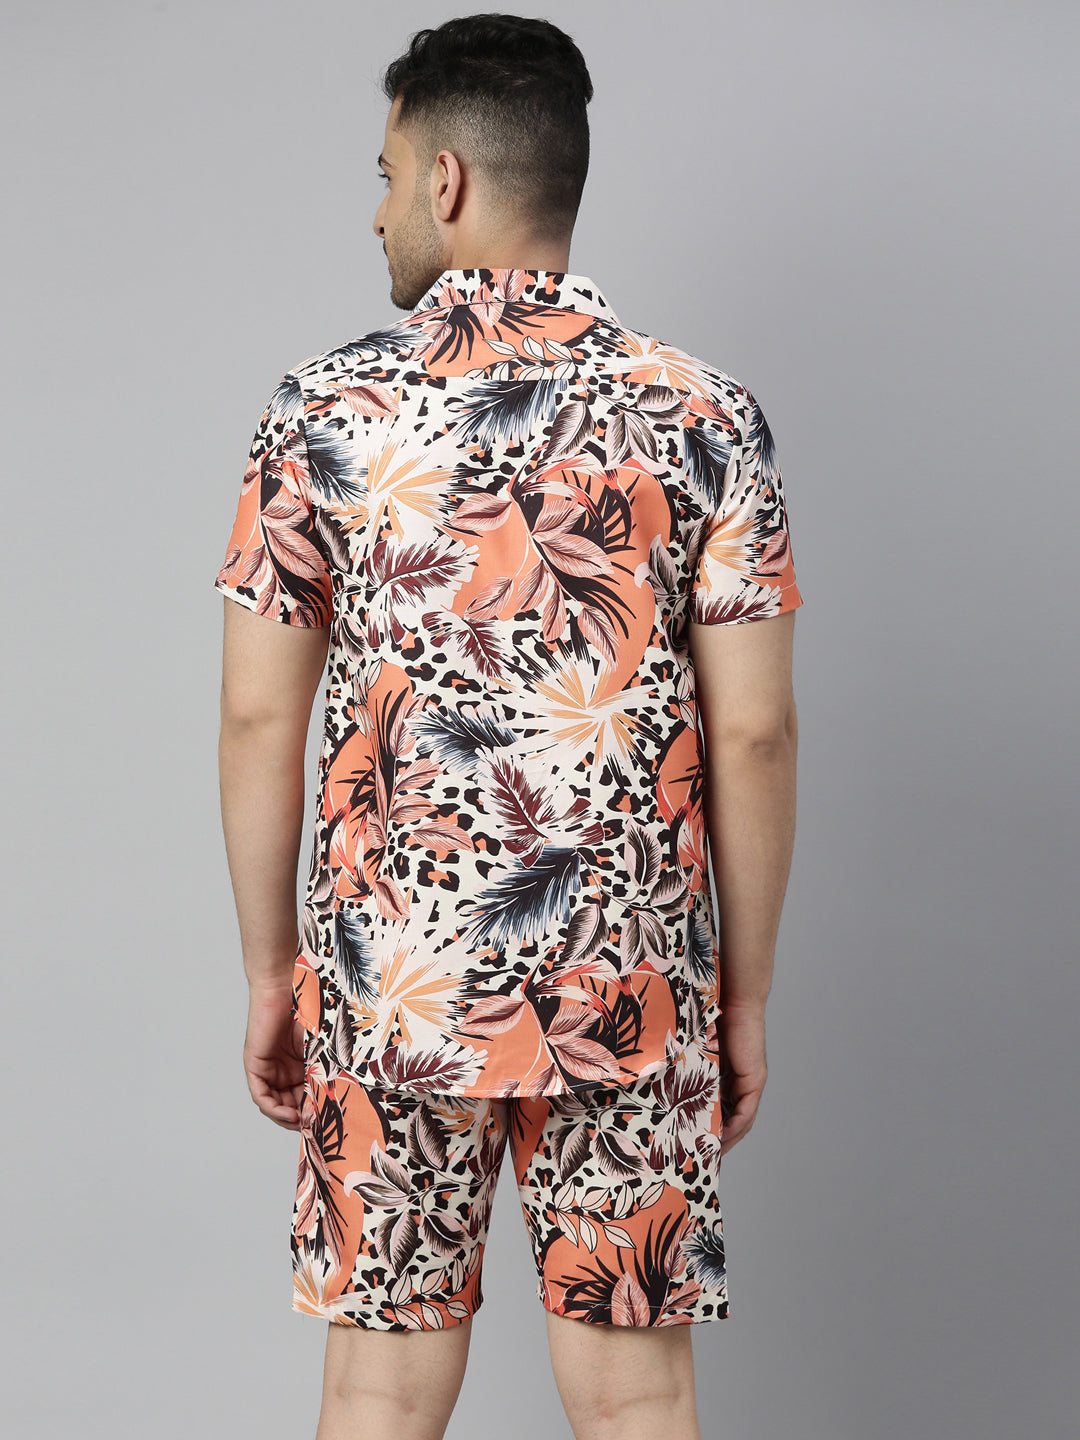 Tropical Leaves Cream Co-Ords Co-Ords Bushirt   